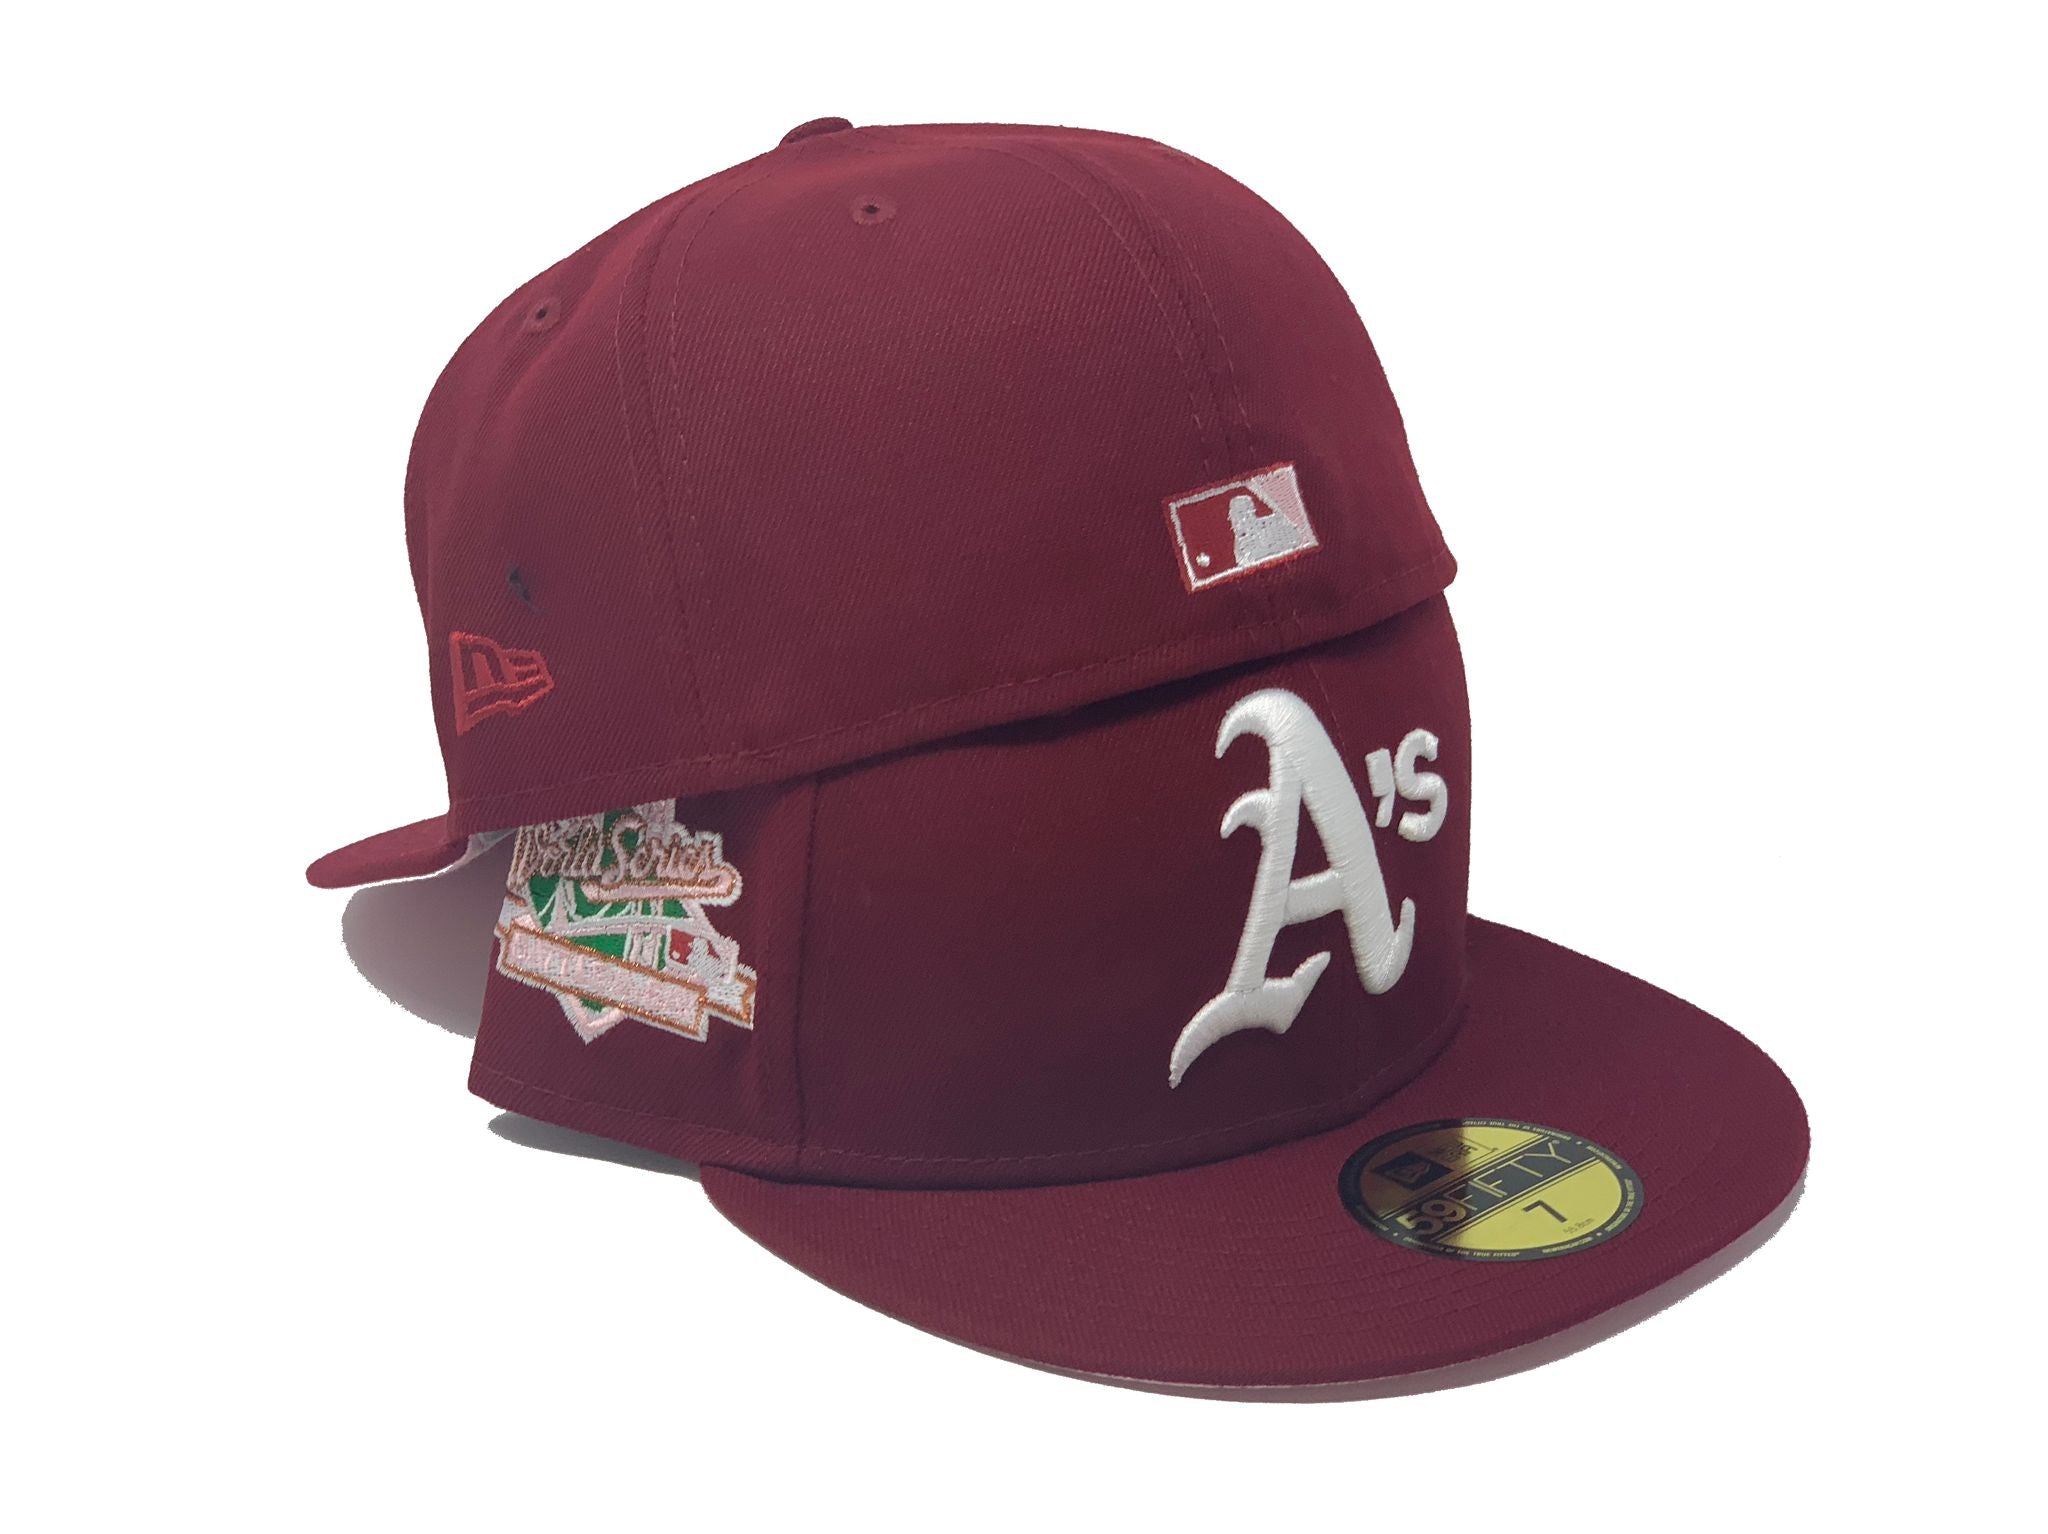 oakland a's hat outfit